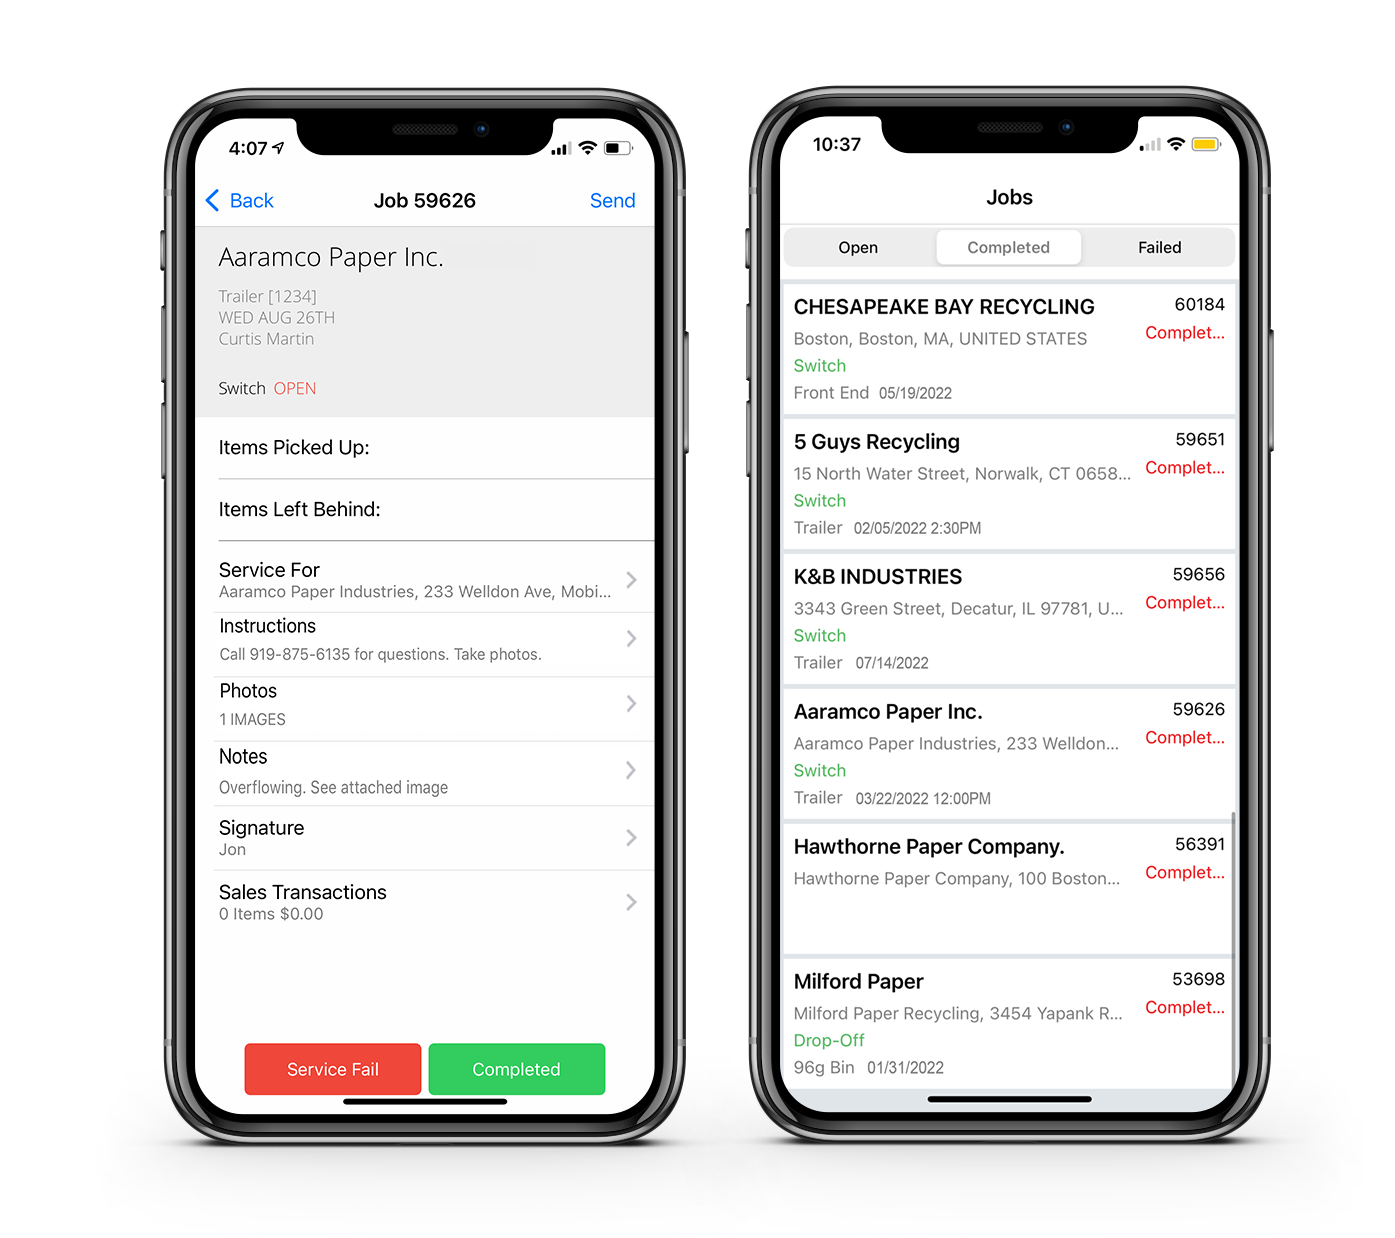 cieTrade's mobile dispatch app, cieDispatch, lets your drivers retrieve a list of assigned tickets, get directions to service locations, update job status, record notes, and even capture photos.